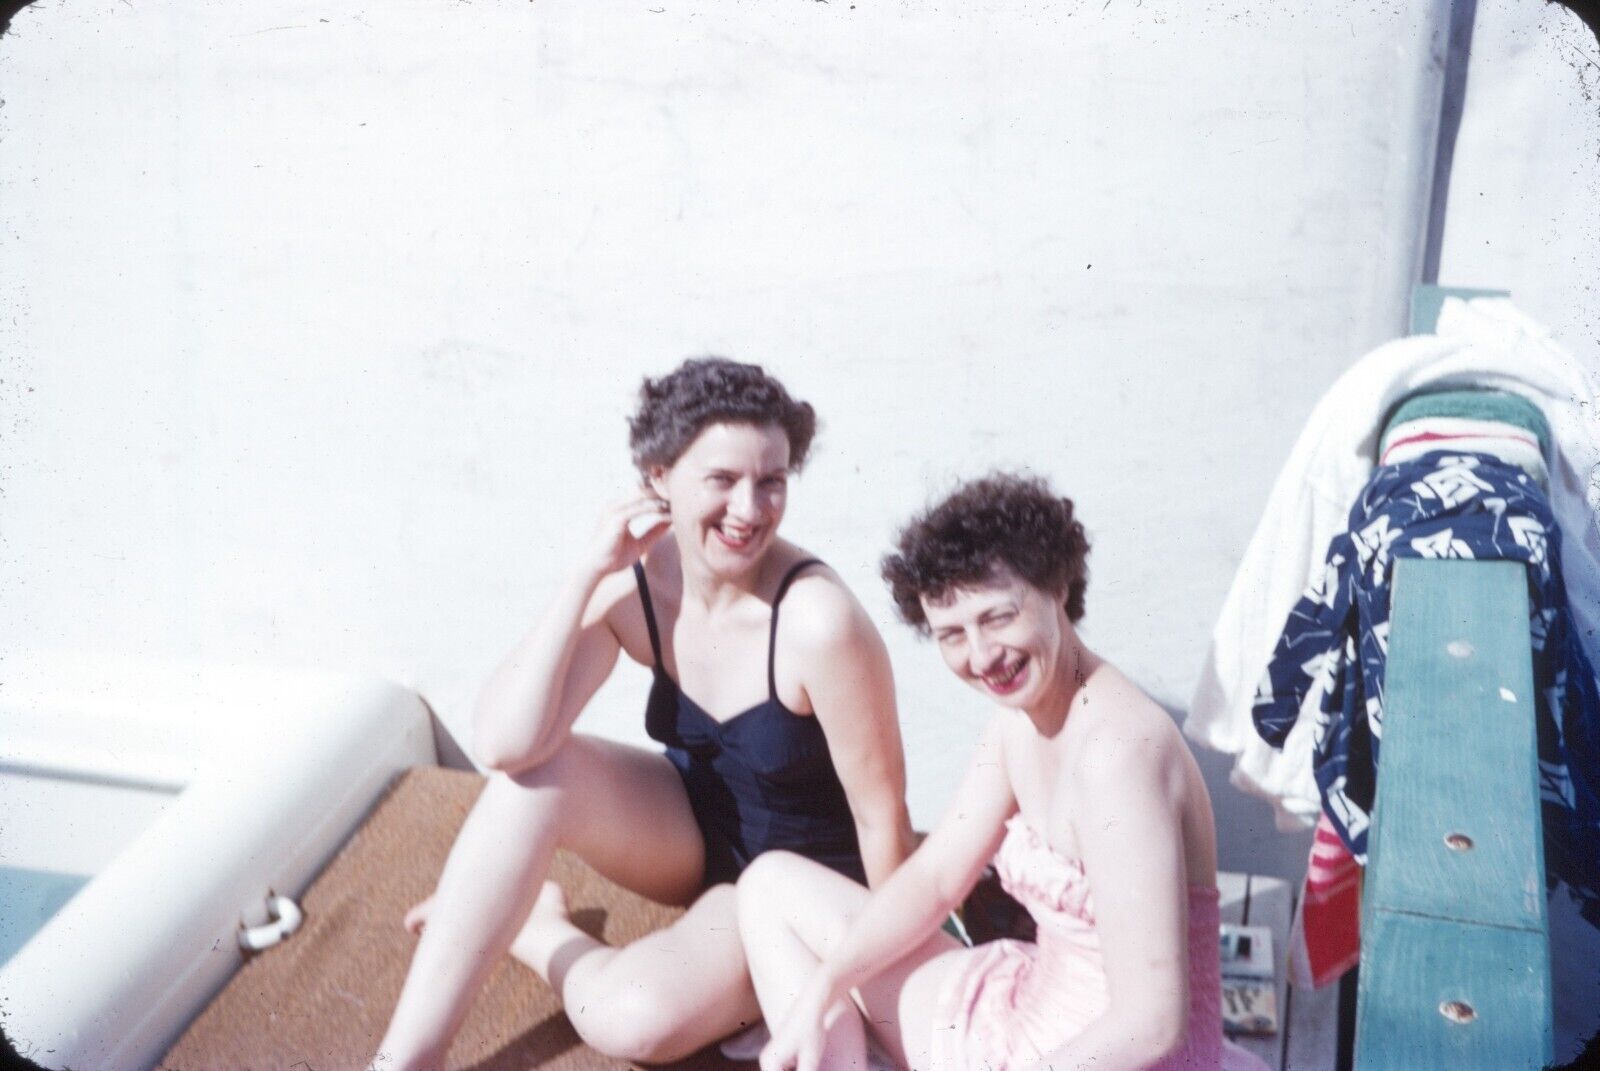 1950s Women By Swimming Pool on Cruise Ship Red Border Vintage 35mm Slide